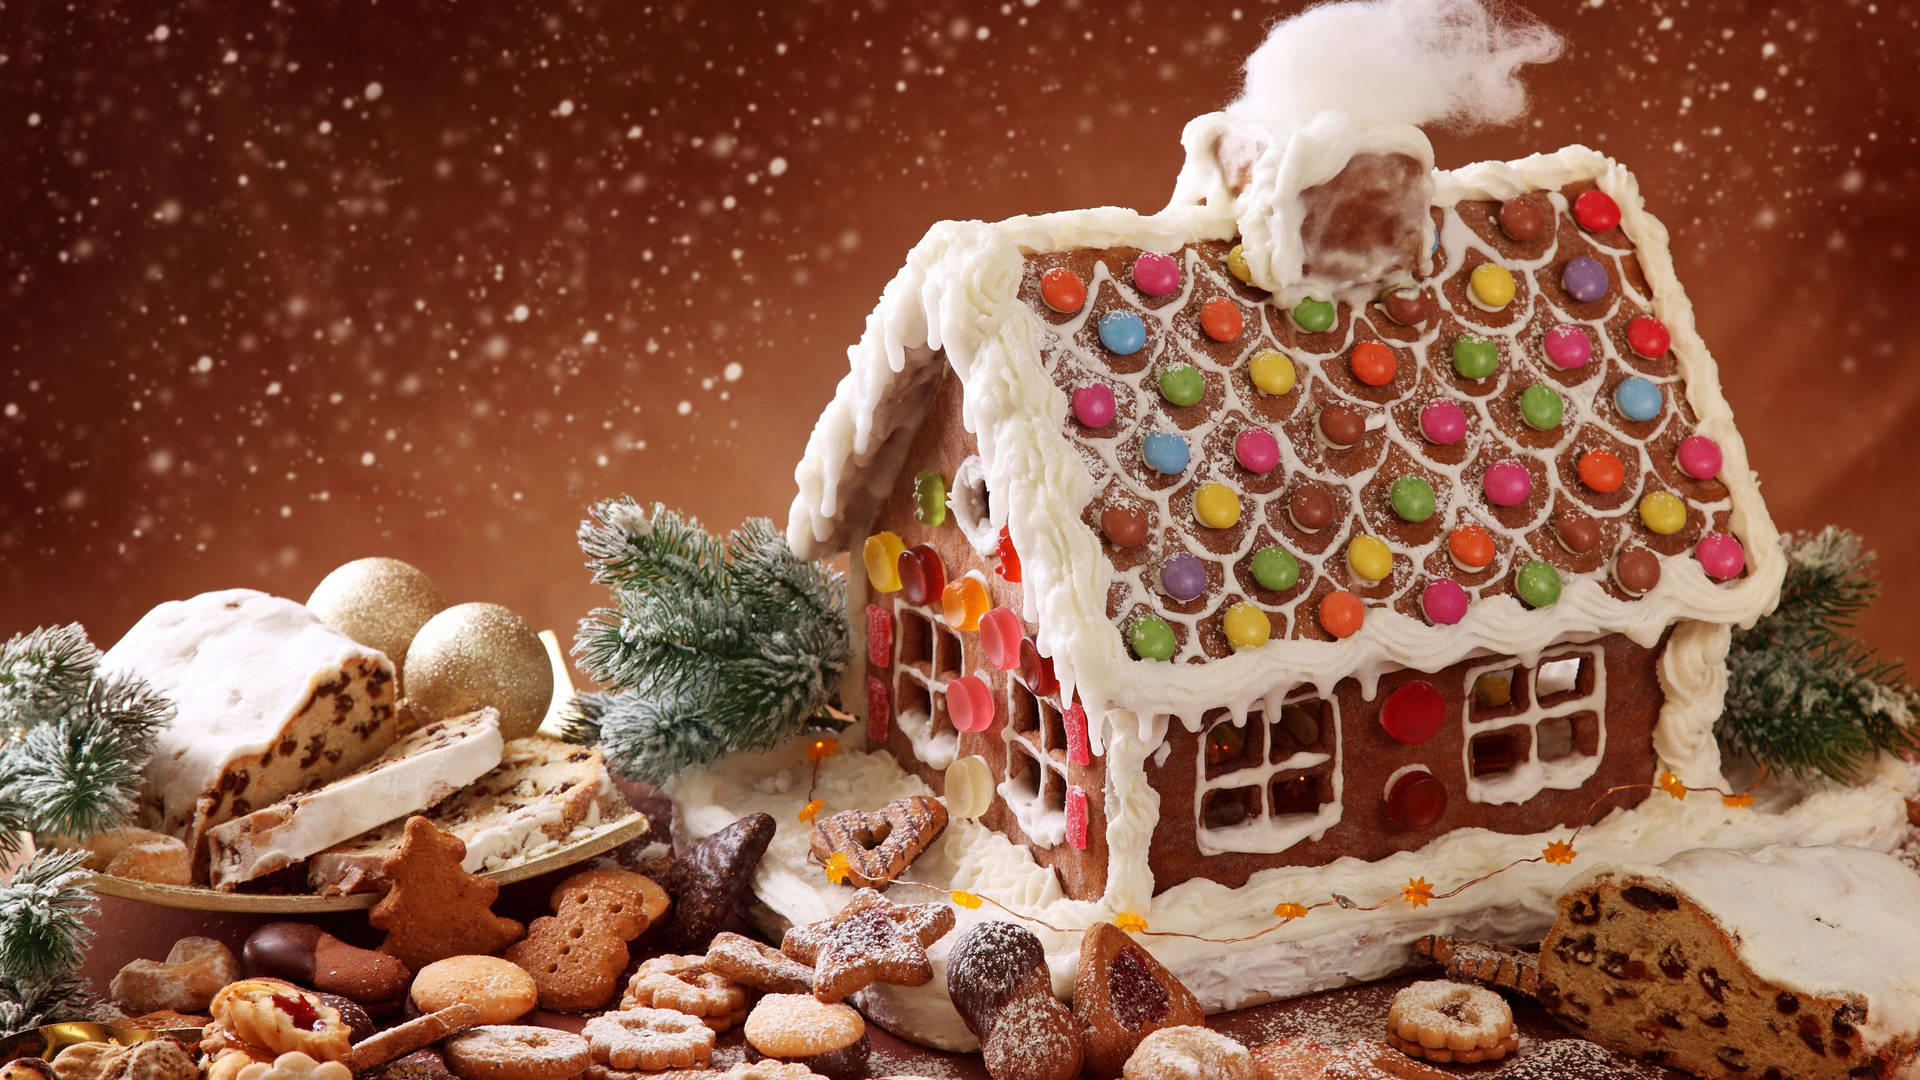 Yummy Gingerbread House And Cookies